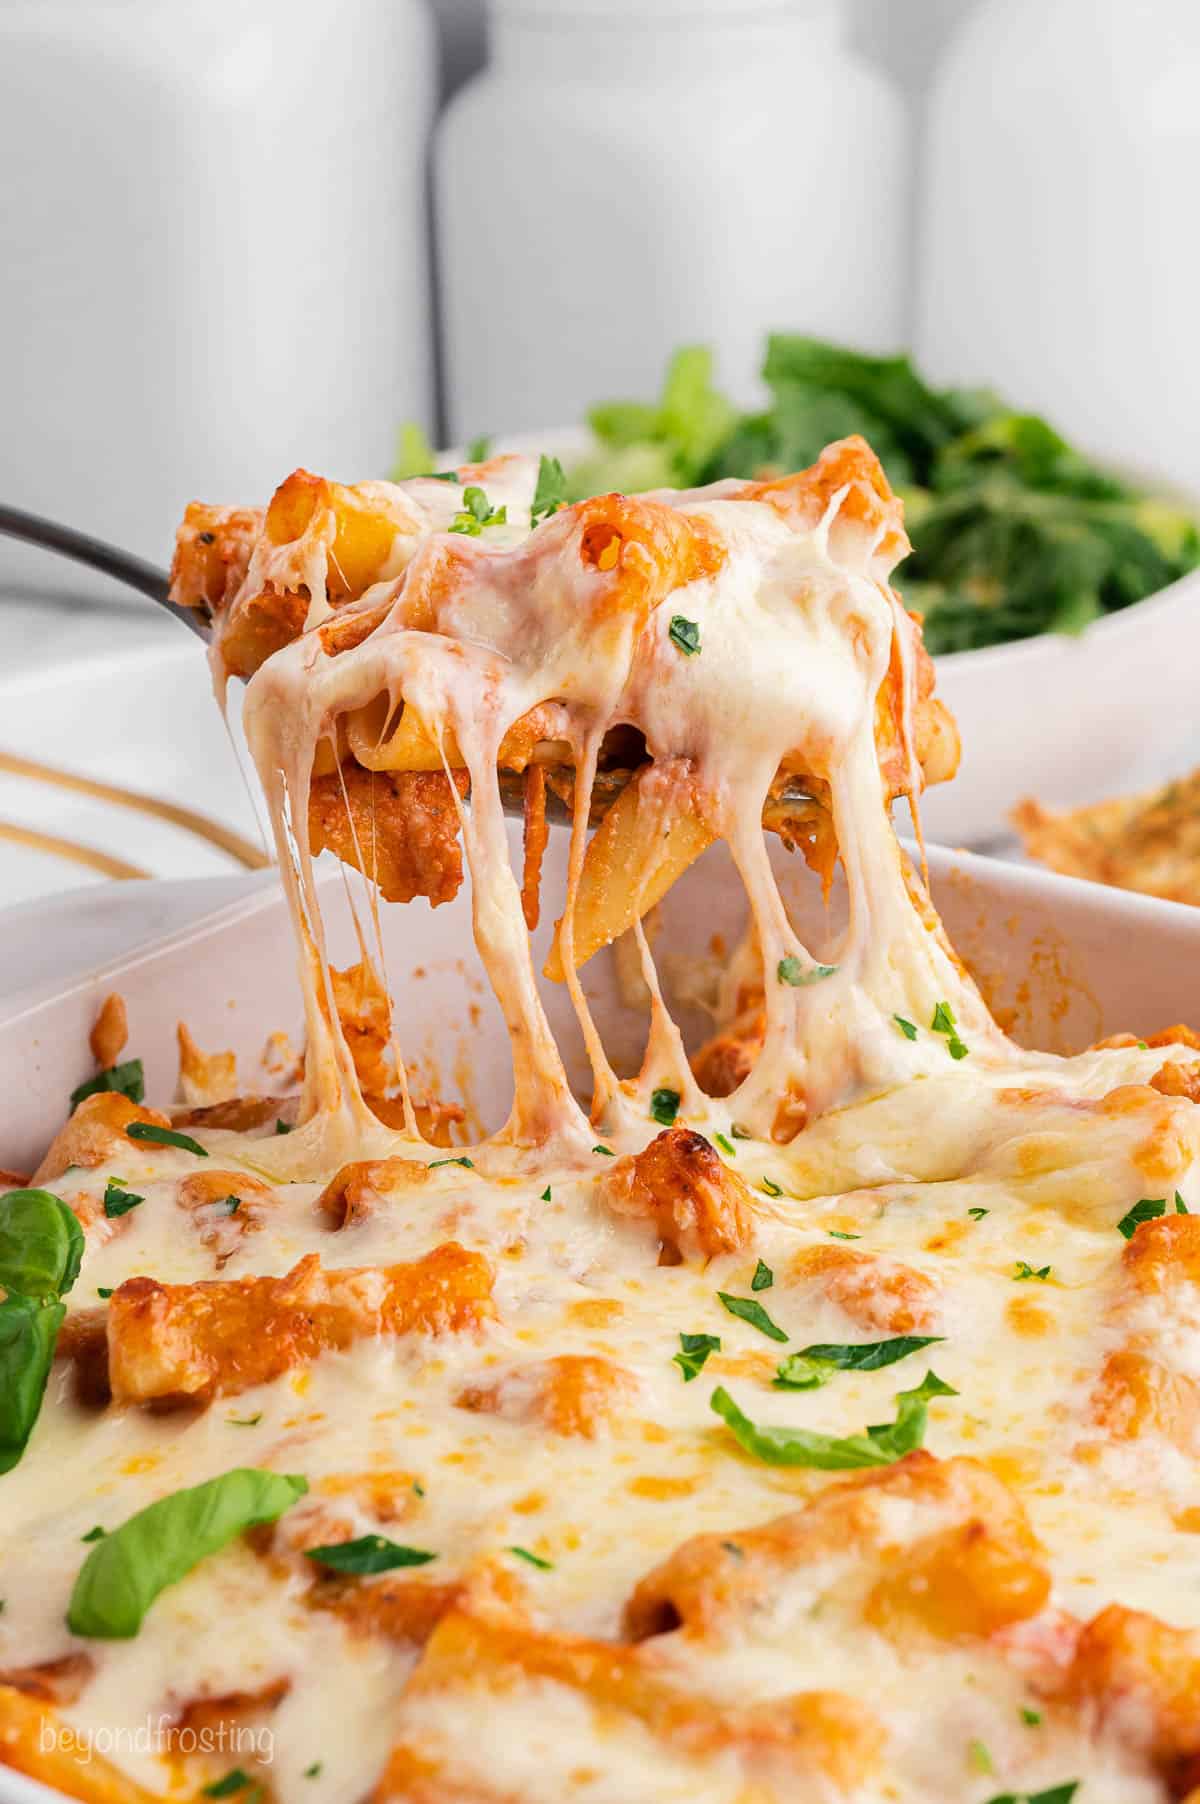 A spoon serving baked ziti